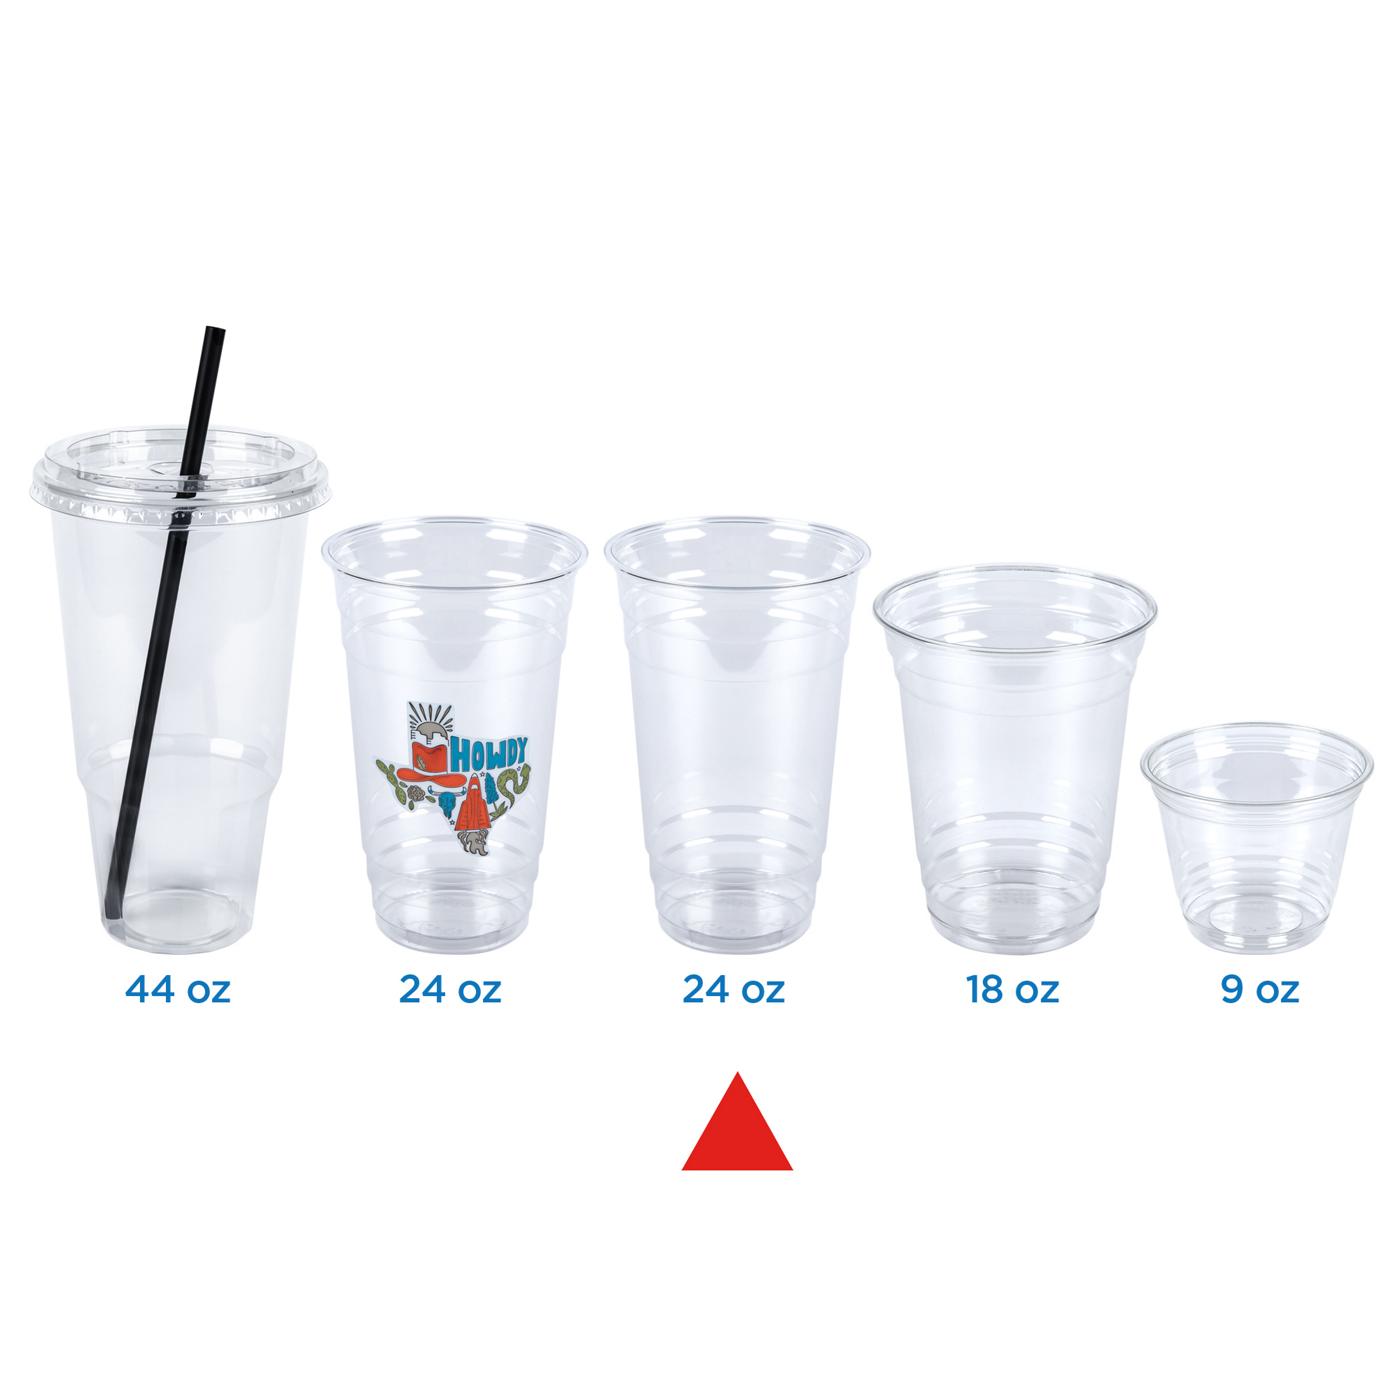 24 oz plastic cups with lids